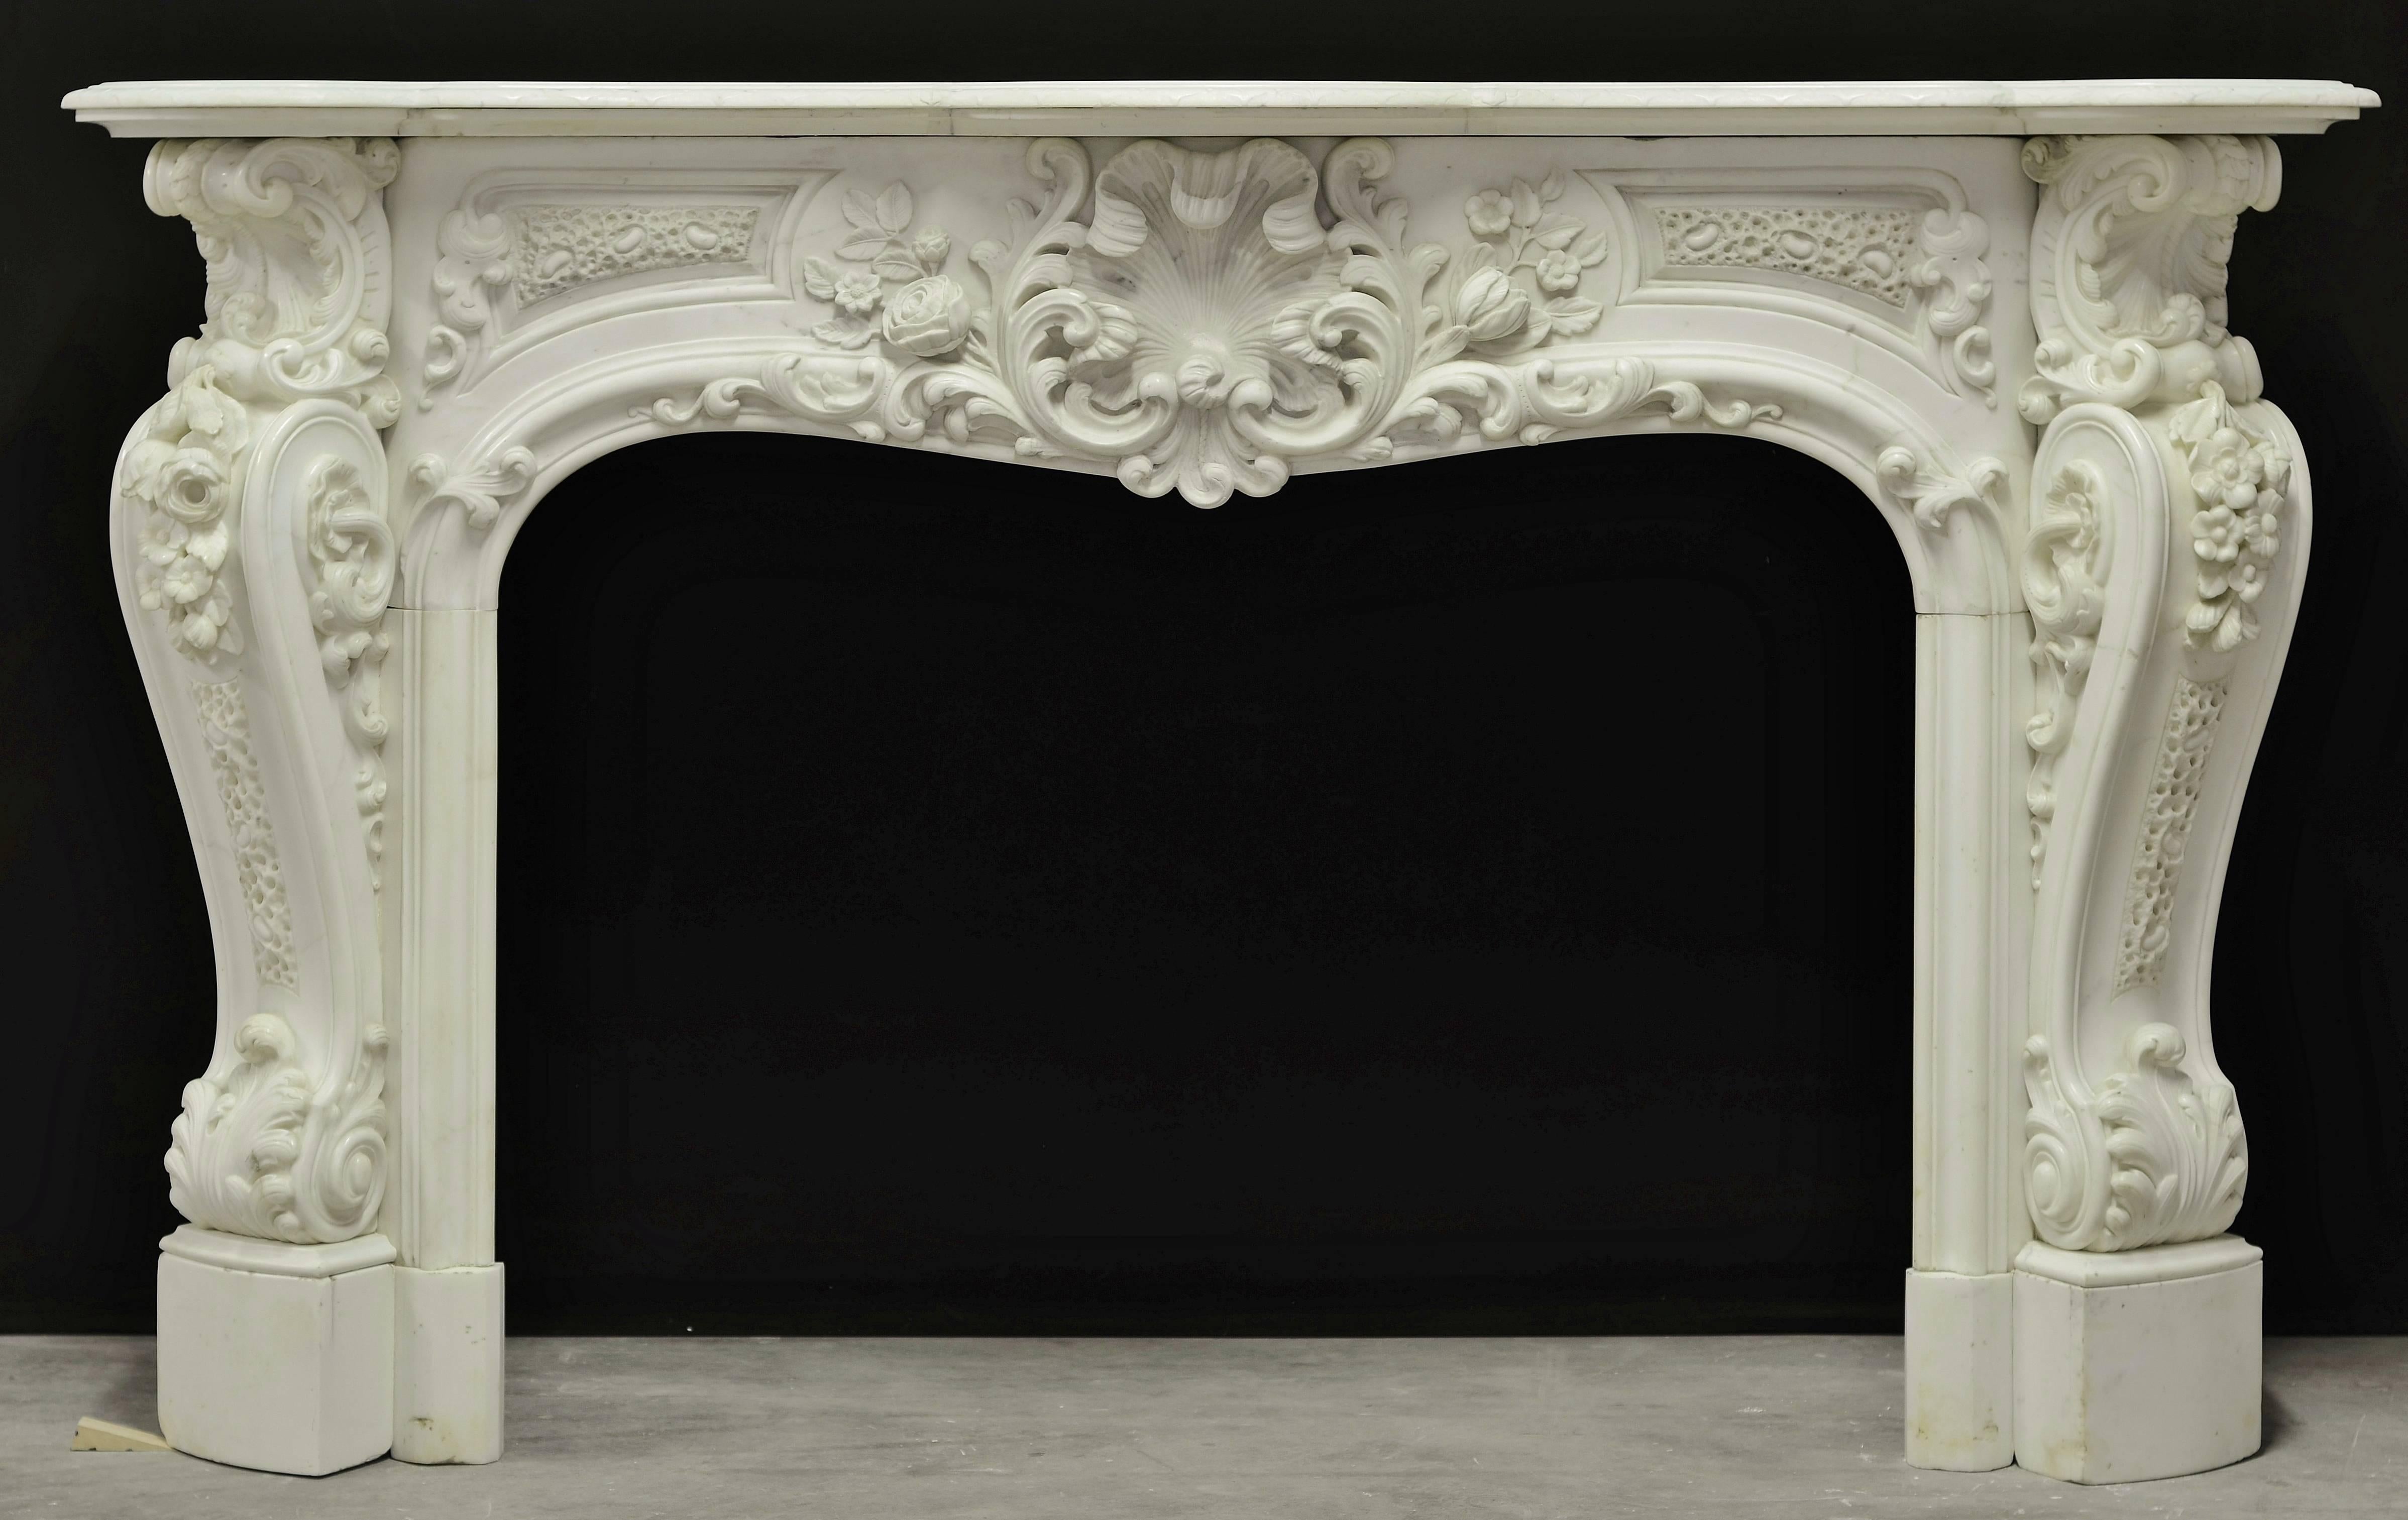 A beautiful, monumental 19th century Louis XV fireplace carved in statuary marble.
The very delicate an rich floral carving are exquisitely executed in Italian statuary marble.
Sold by Willem Schermerhorn Antique Fireplaces

Ready to be shipped and